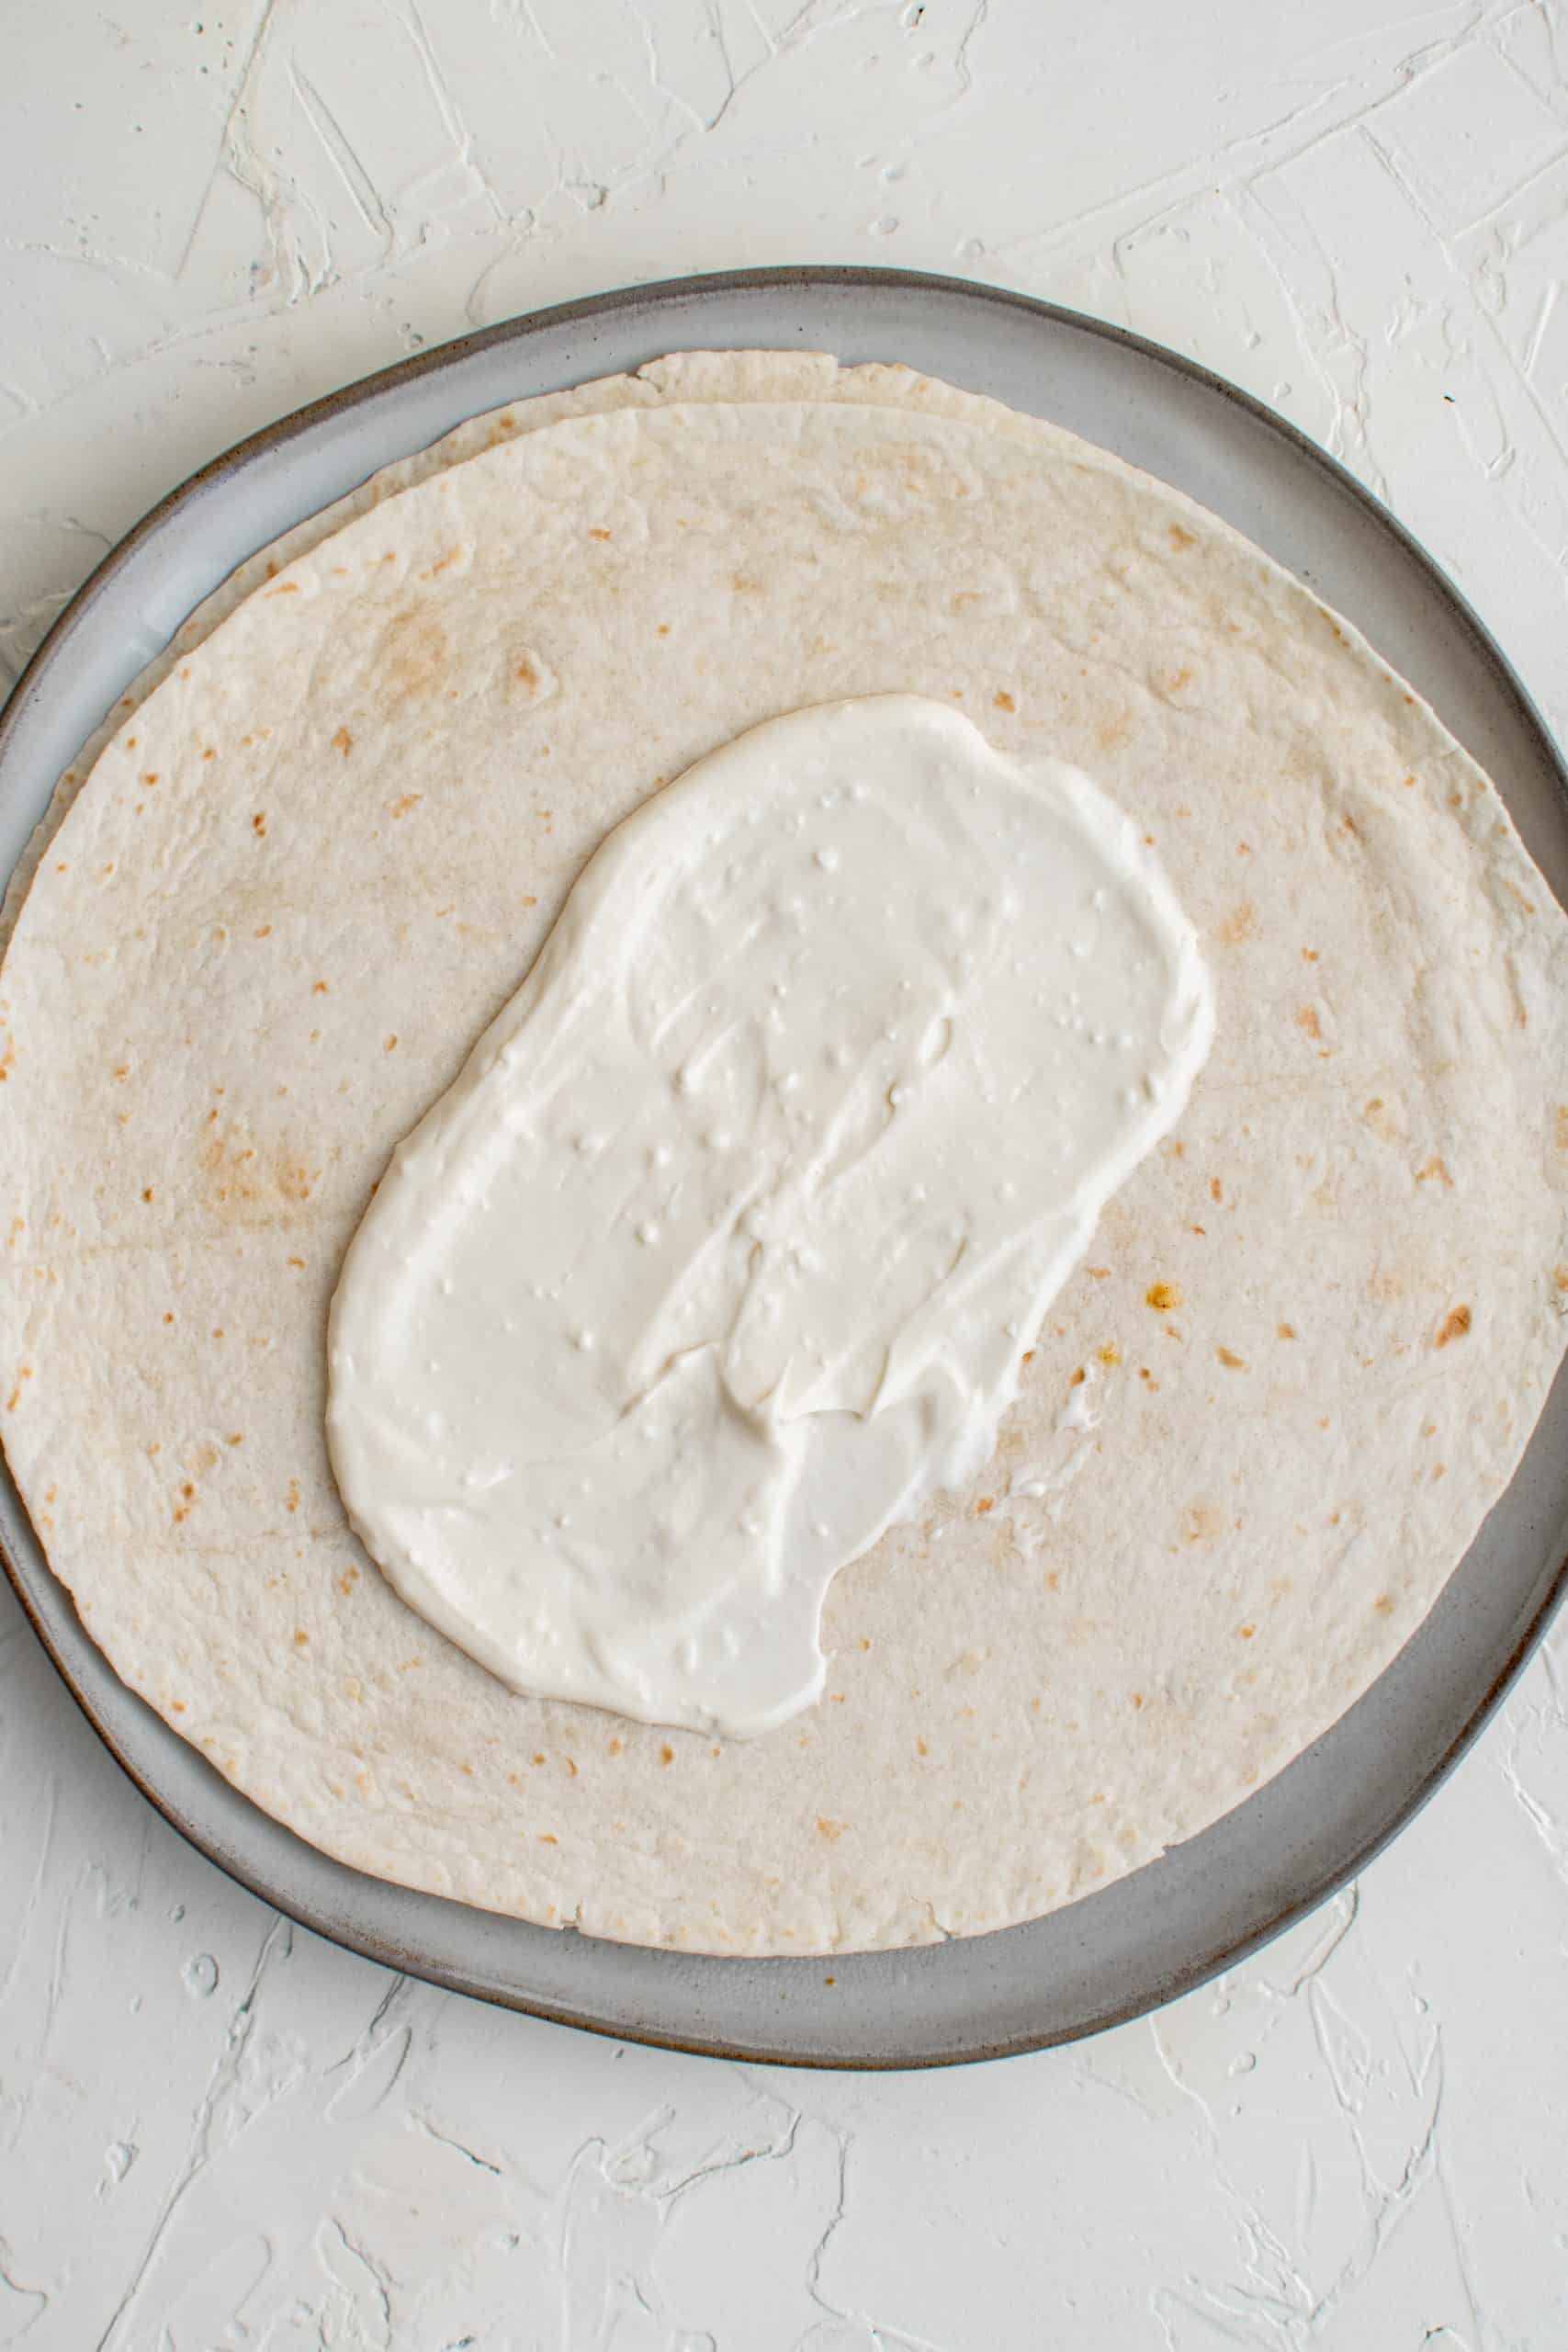 Sauce spread in center of one tortilla.